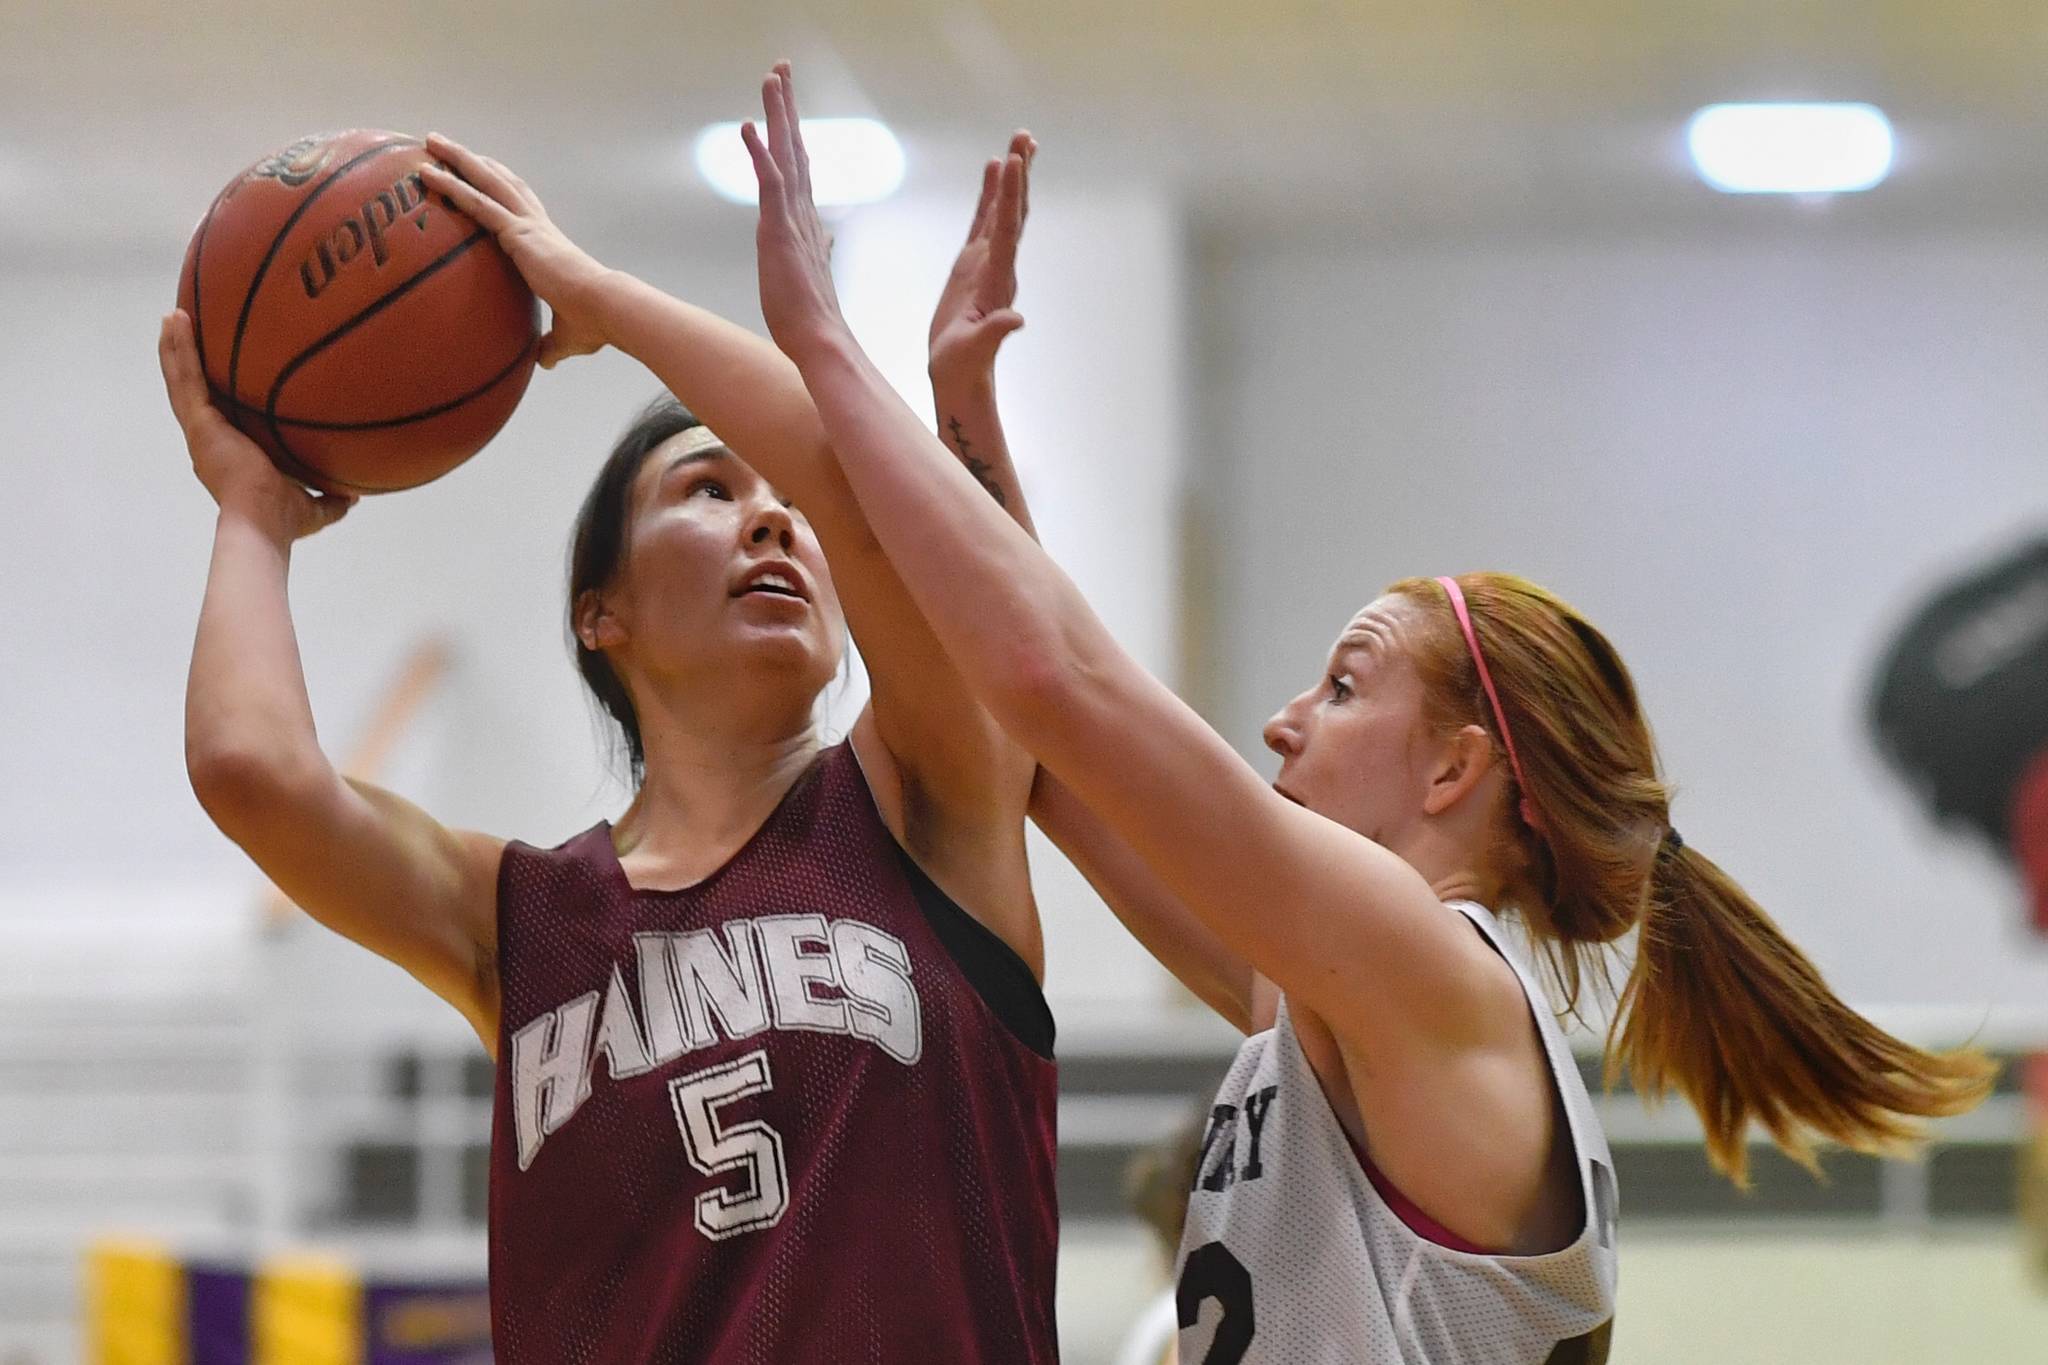 Haines’ Fran Daly, left, scores on Skagway’s Jesse Ellis in the women’s final at the Gold Medal Basketball Tournament on Saturday, March 23, 2019. (Michael Penn | Juneau Empire)